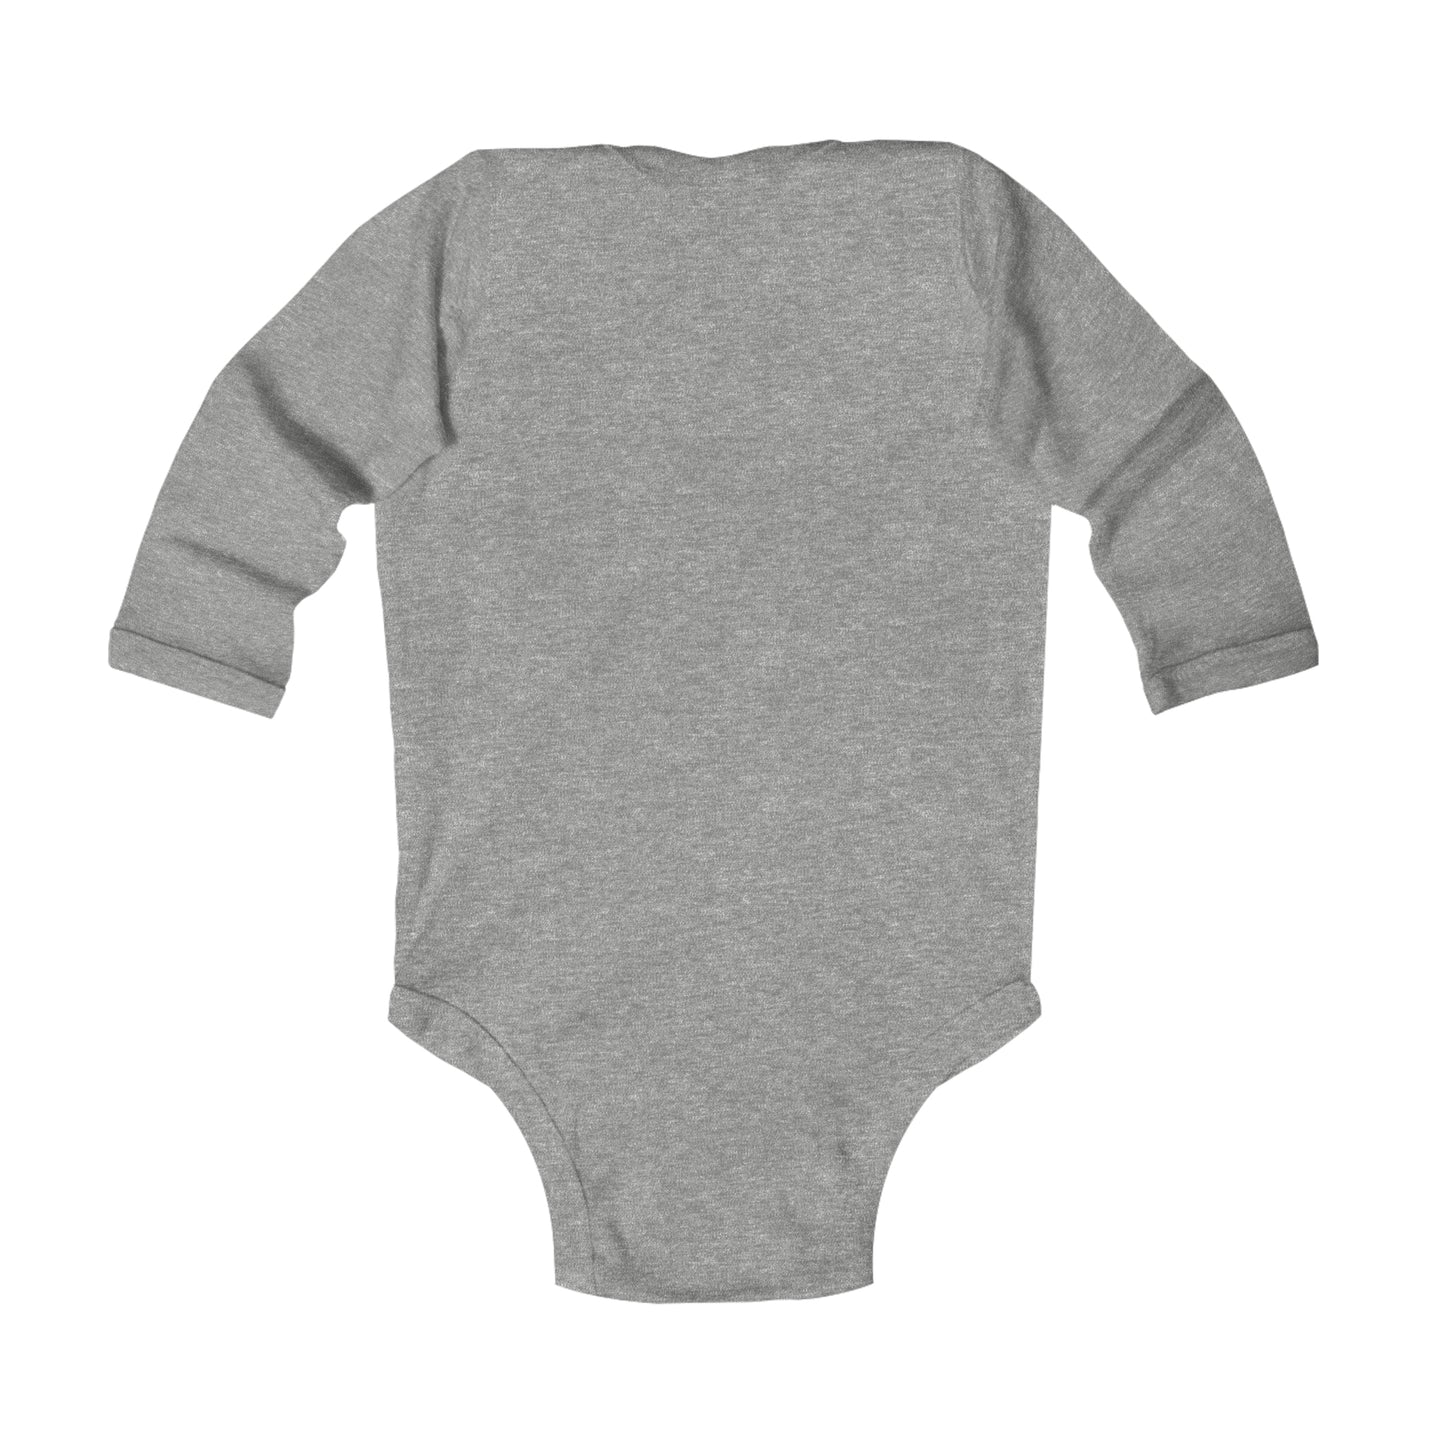 Mama's Boy | Big Heart Valentine's Outfit for Baby Boy | Infant Long Sleeve Bodysuit